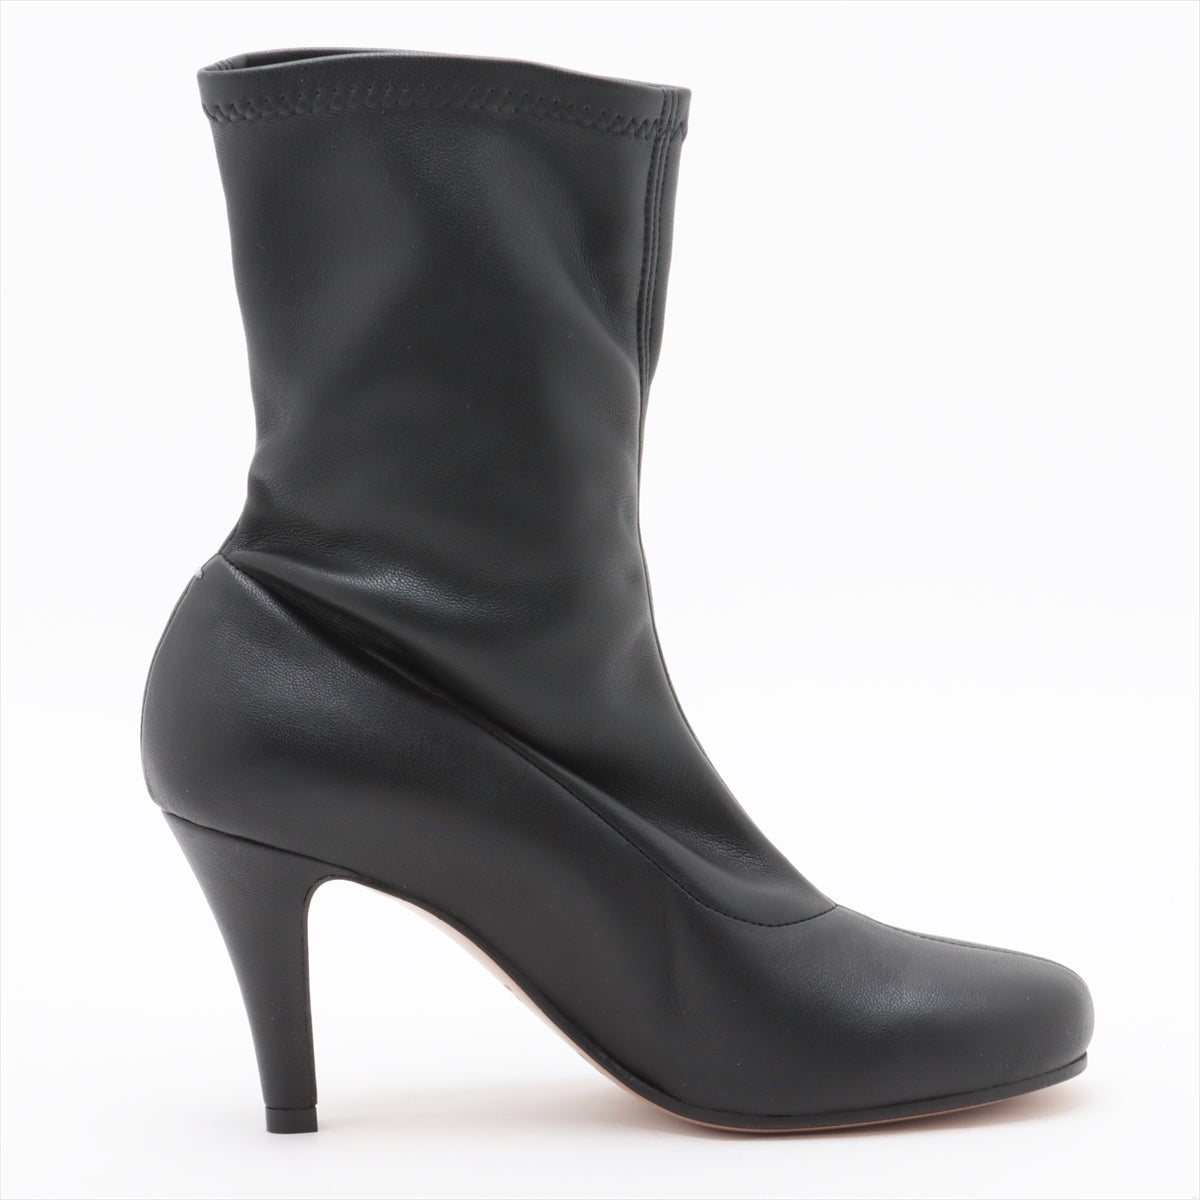 Maison Margiela 20AW Leather Boots 35 Ladies' Black S58WU0357 22 Missing insoles and heels